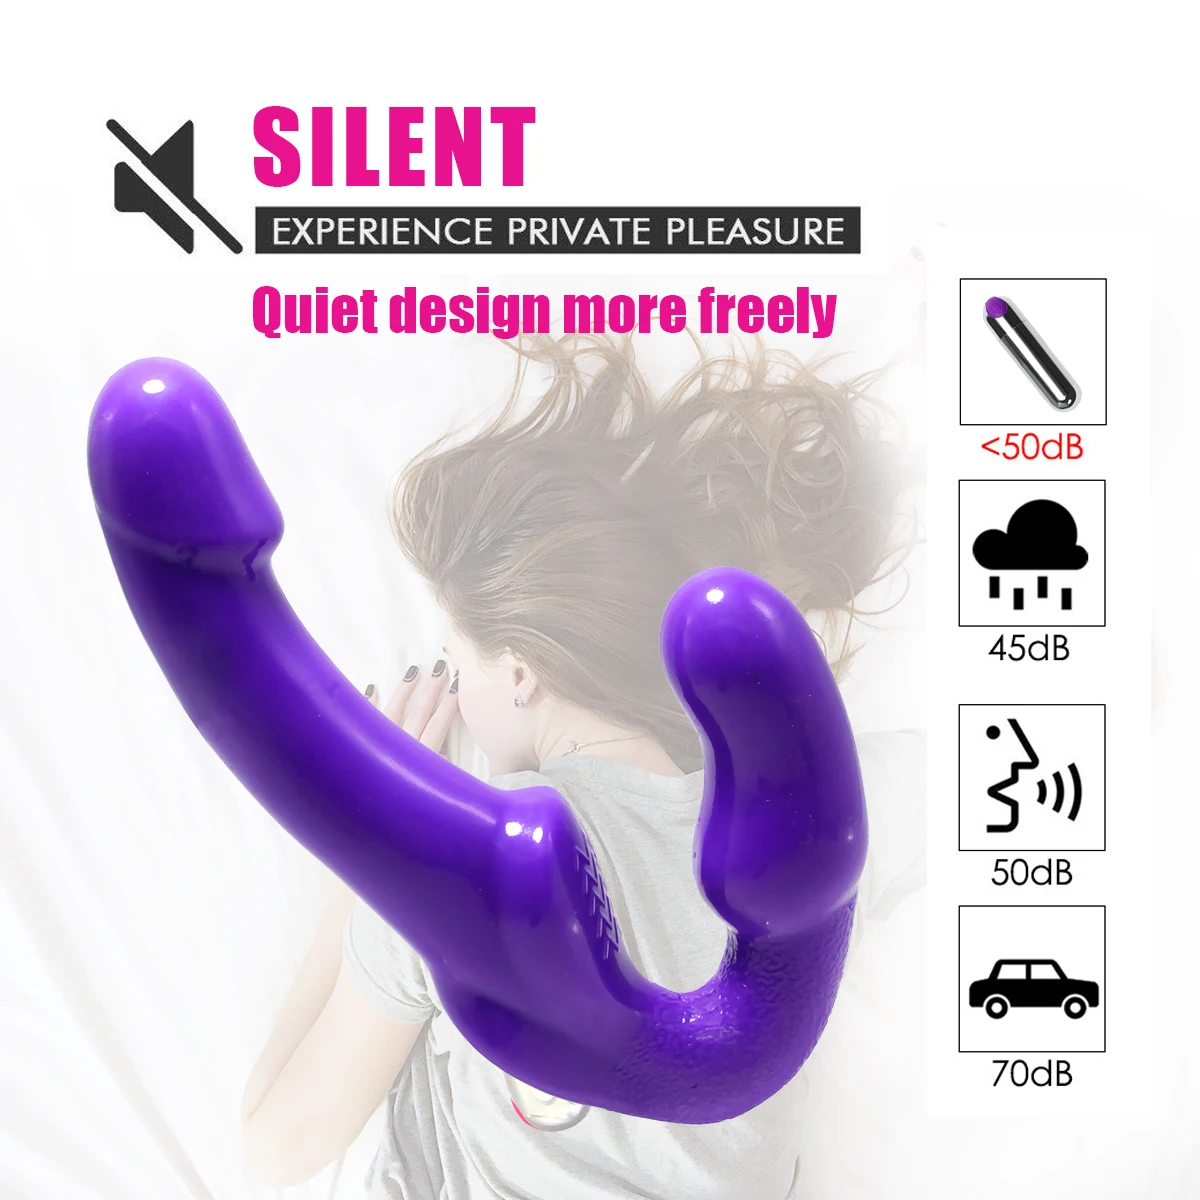 China Manufacturer Strapless Strap-on Dildo Vibrator for Couples Strapon For Lesiban Wireless Remote Control Double-heads Vibrator Adult Sex Toys Distributor H003fc6d3cc8a450f823a0b2d39226e61F